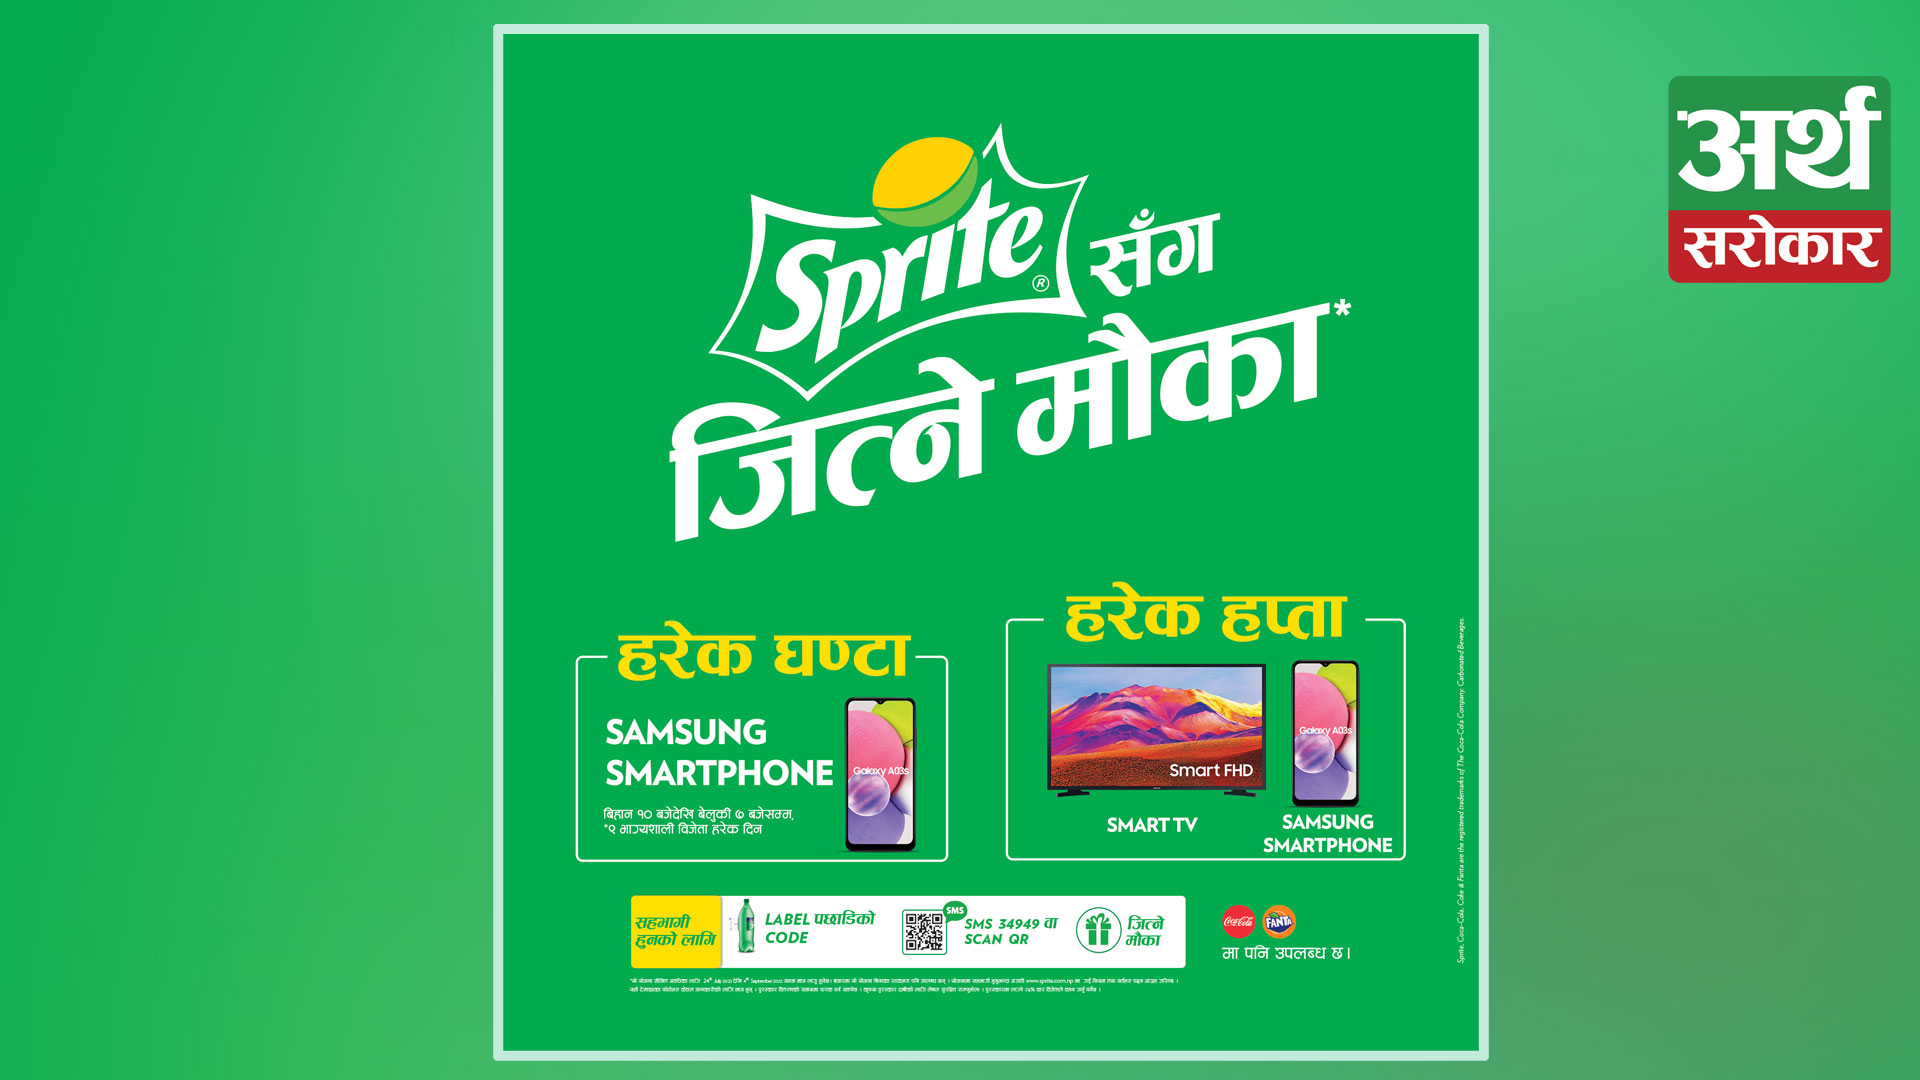 Sprite Launches its Biggest Promotional Campaign ever in Nepal